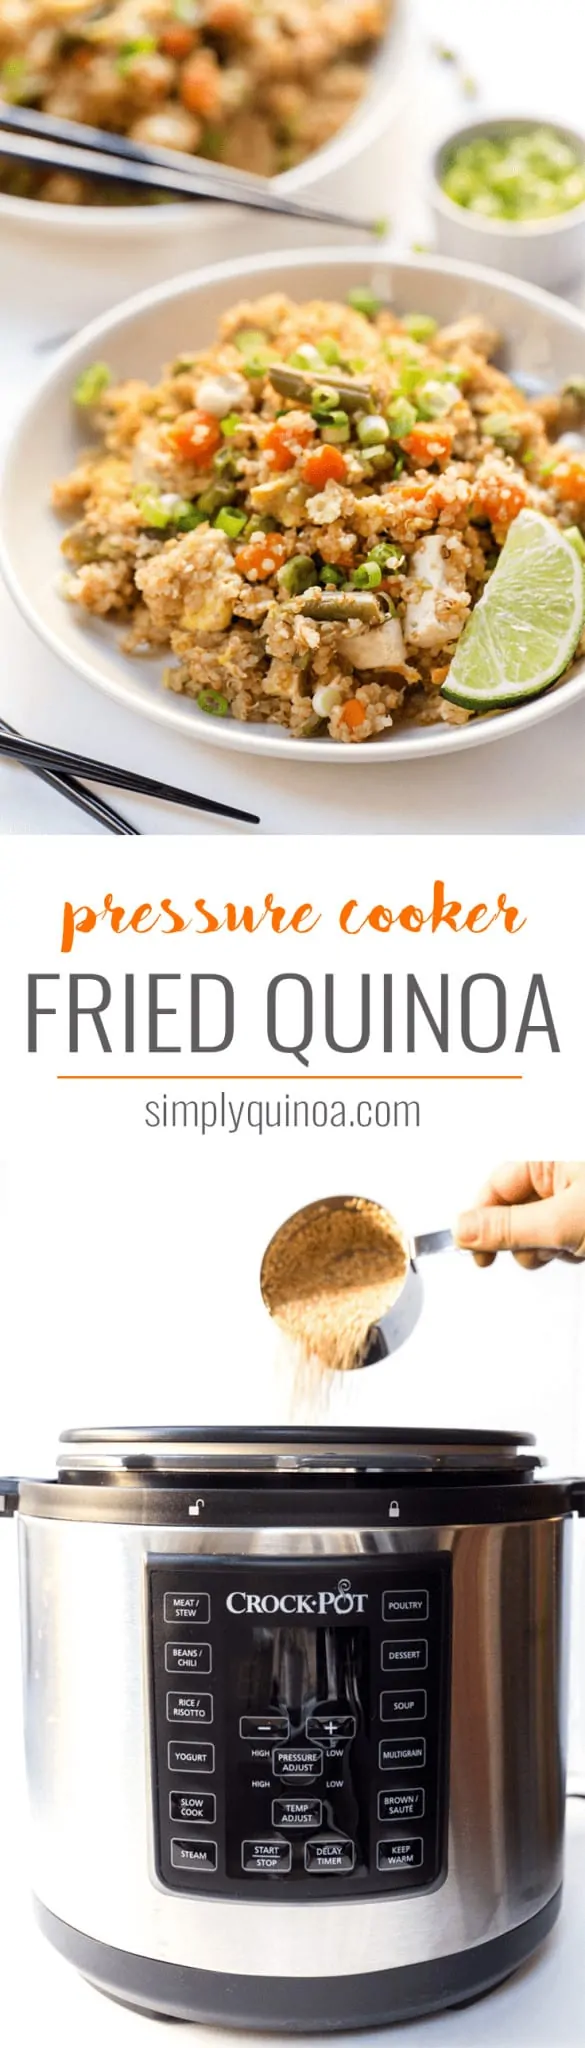 how to make fried quinoa in the pressure cooker